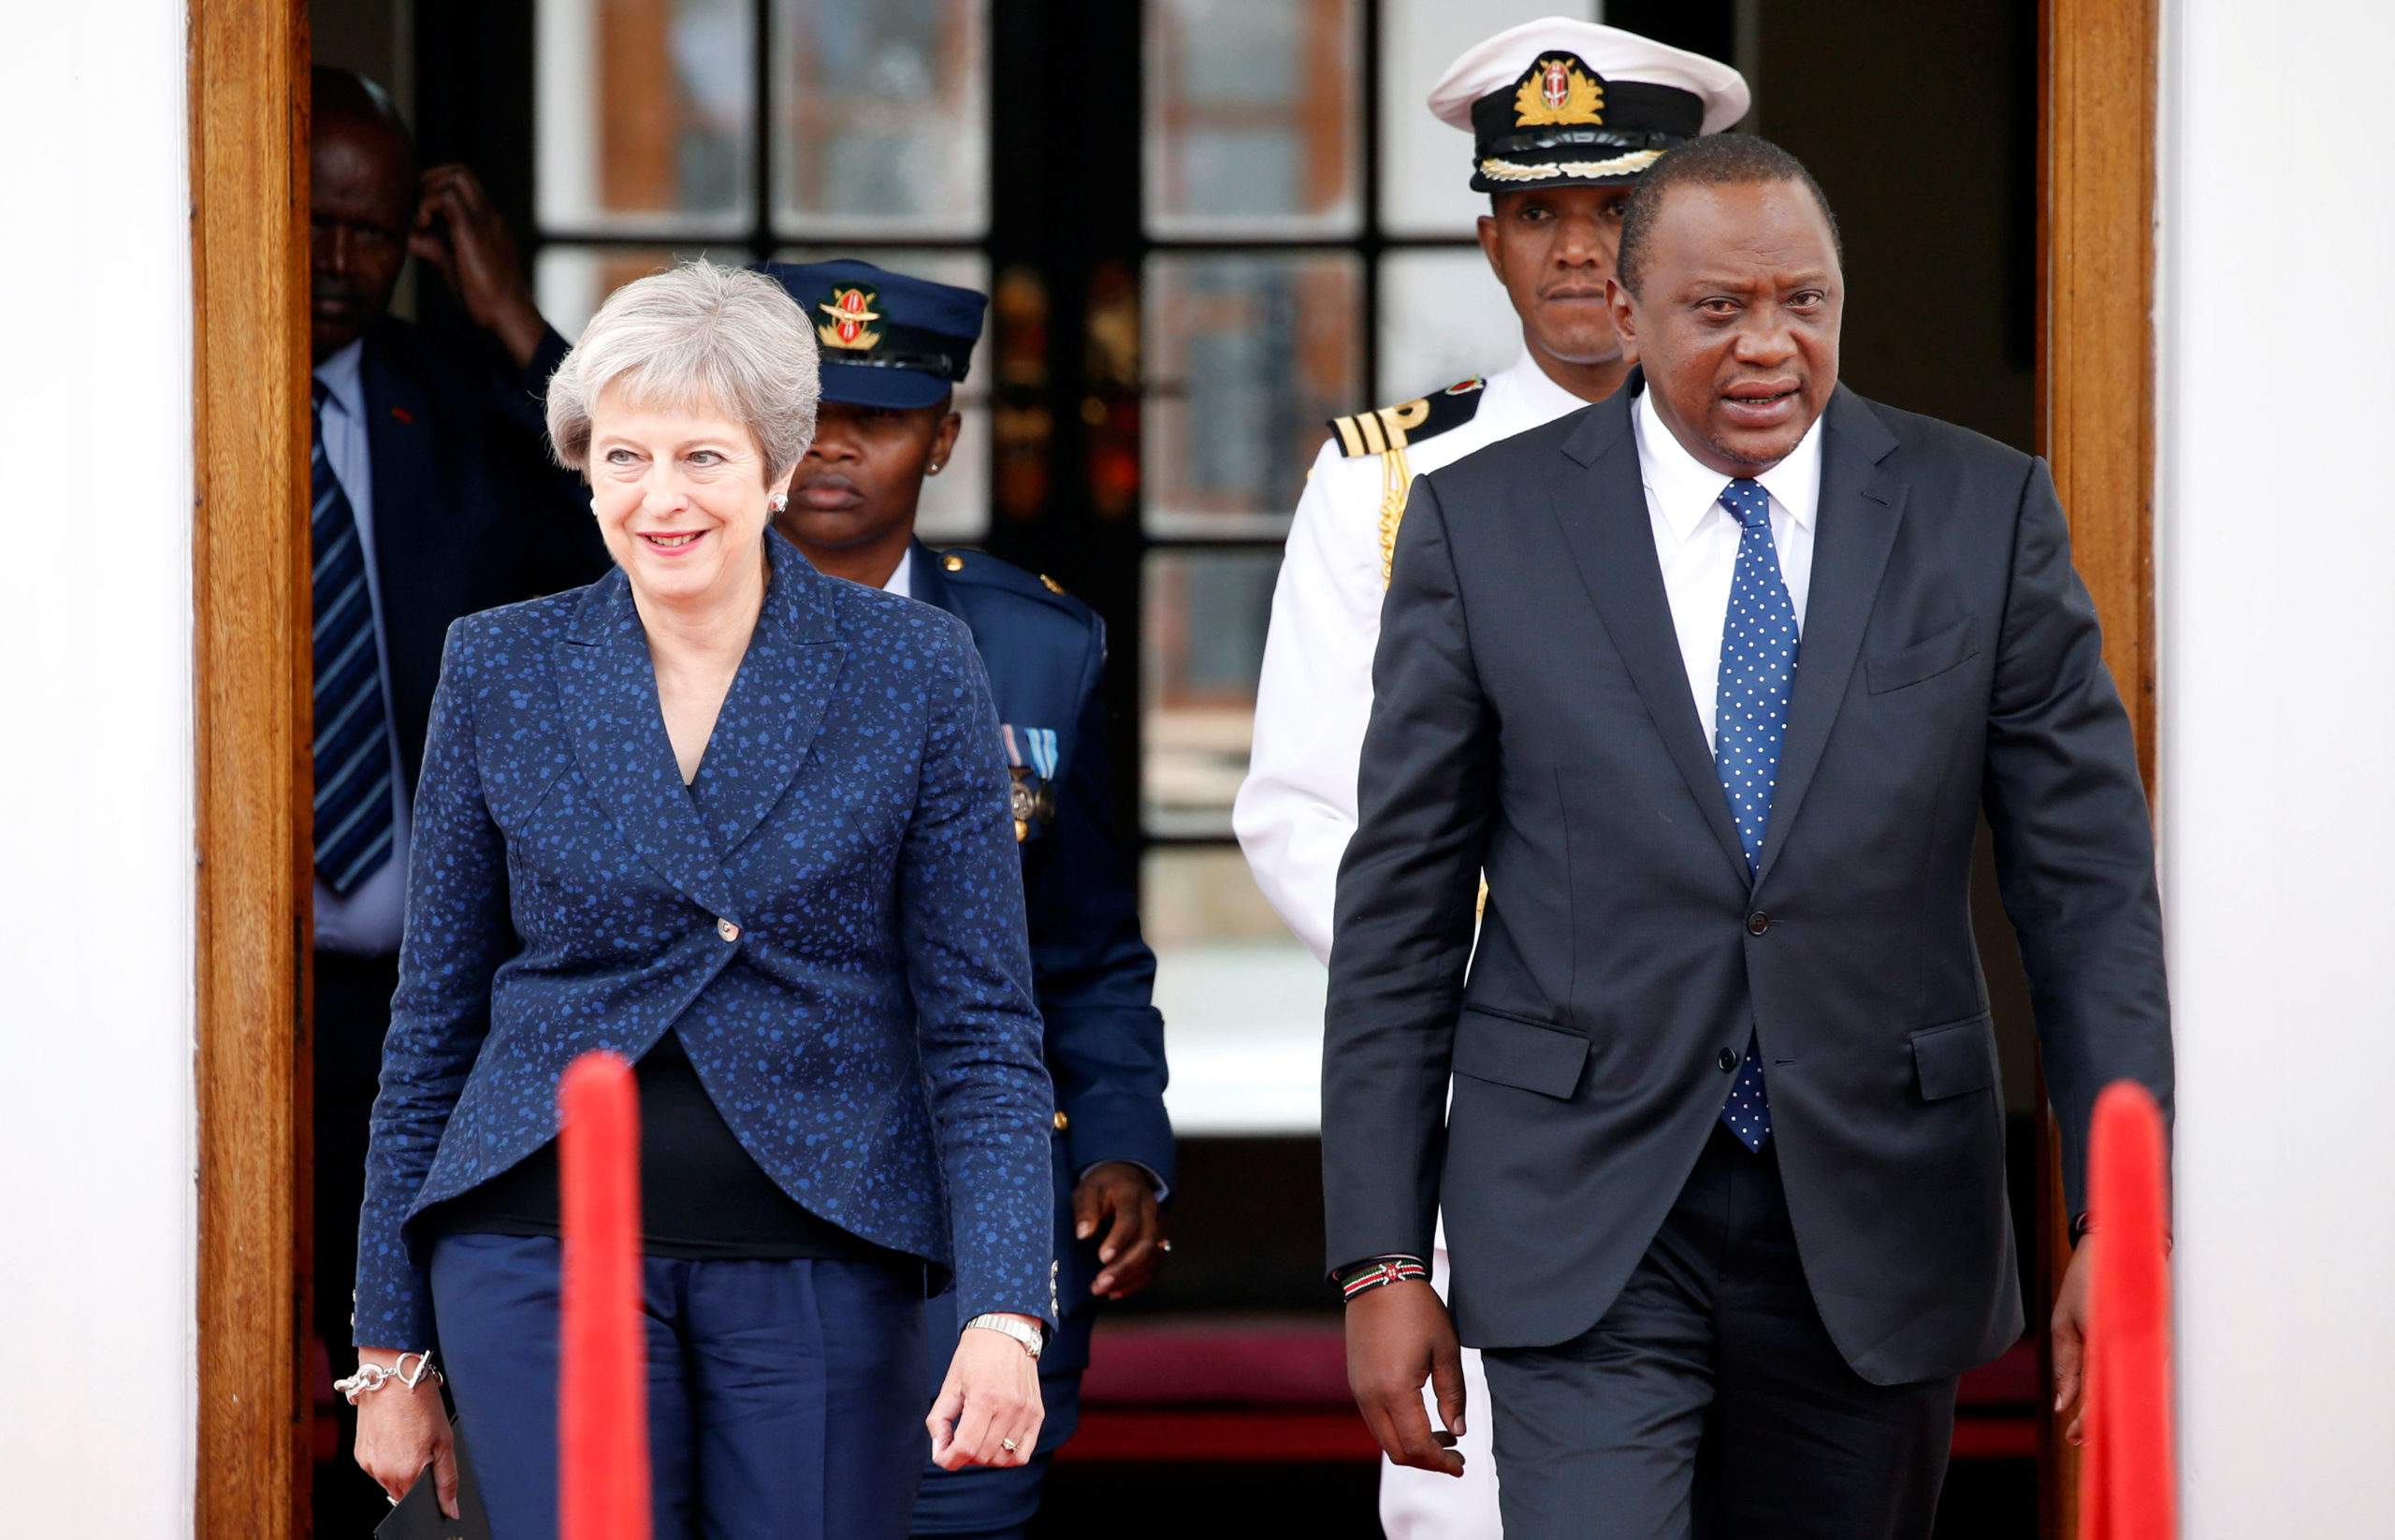 PM May says Britain committed to free trade with Kenya after Brexit